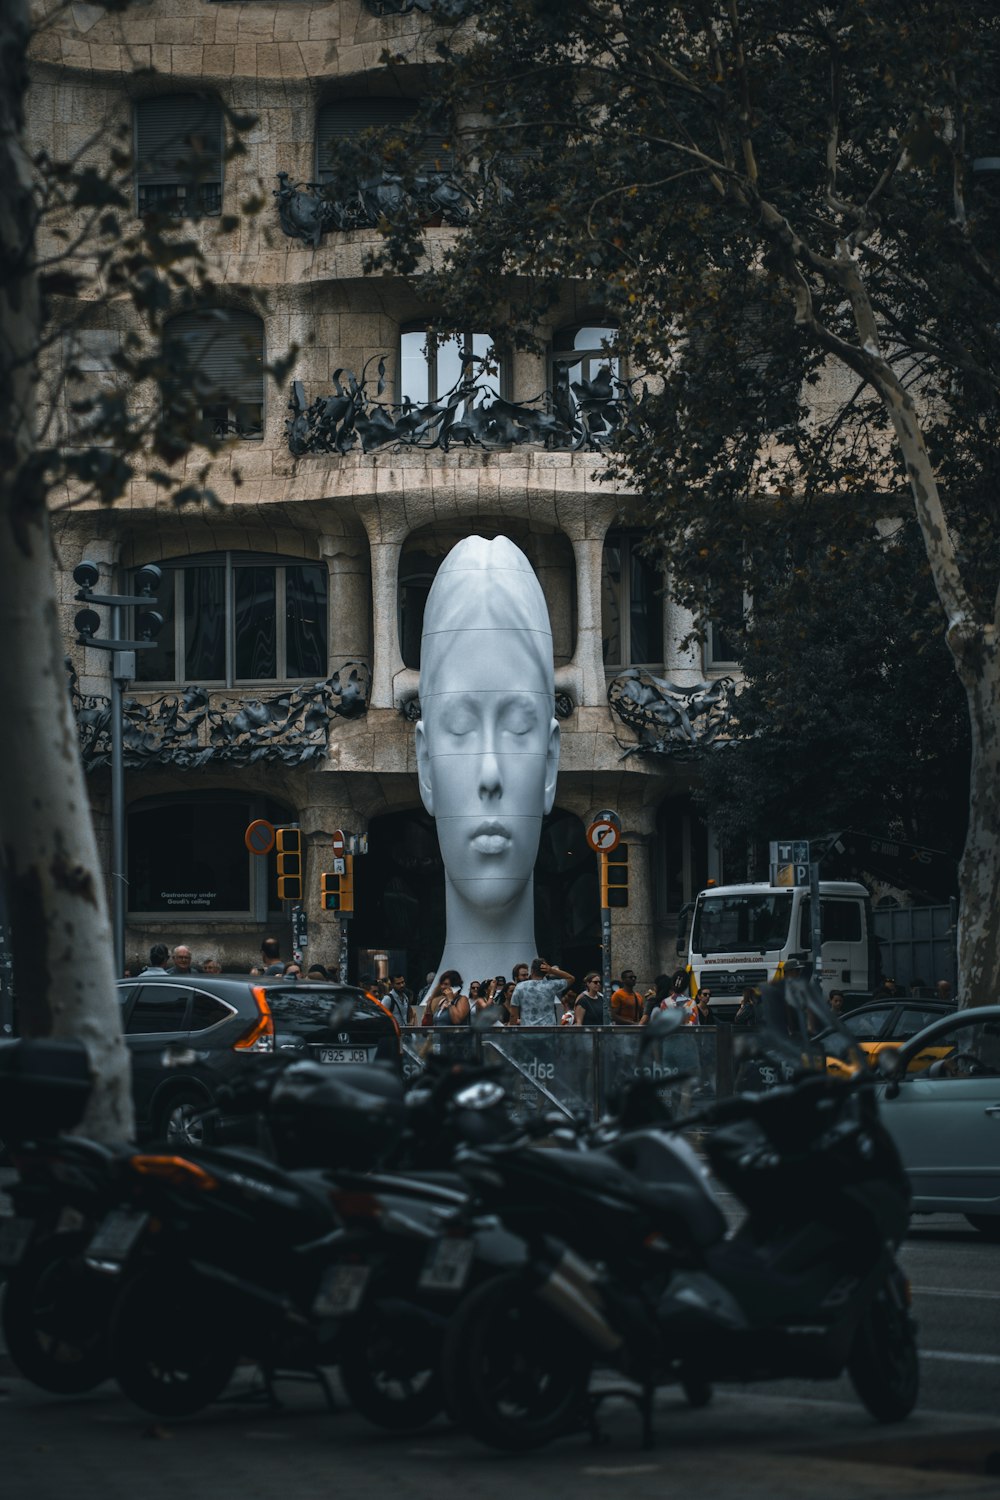 a statue of a woman's head in front of a building